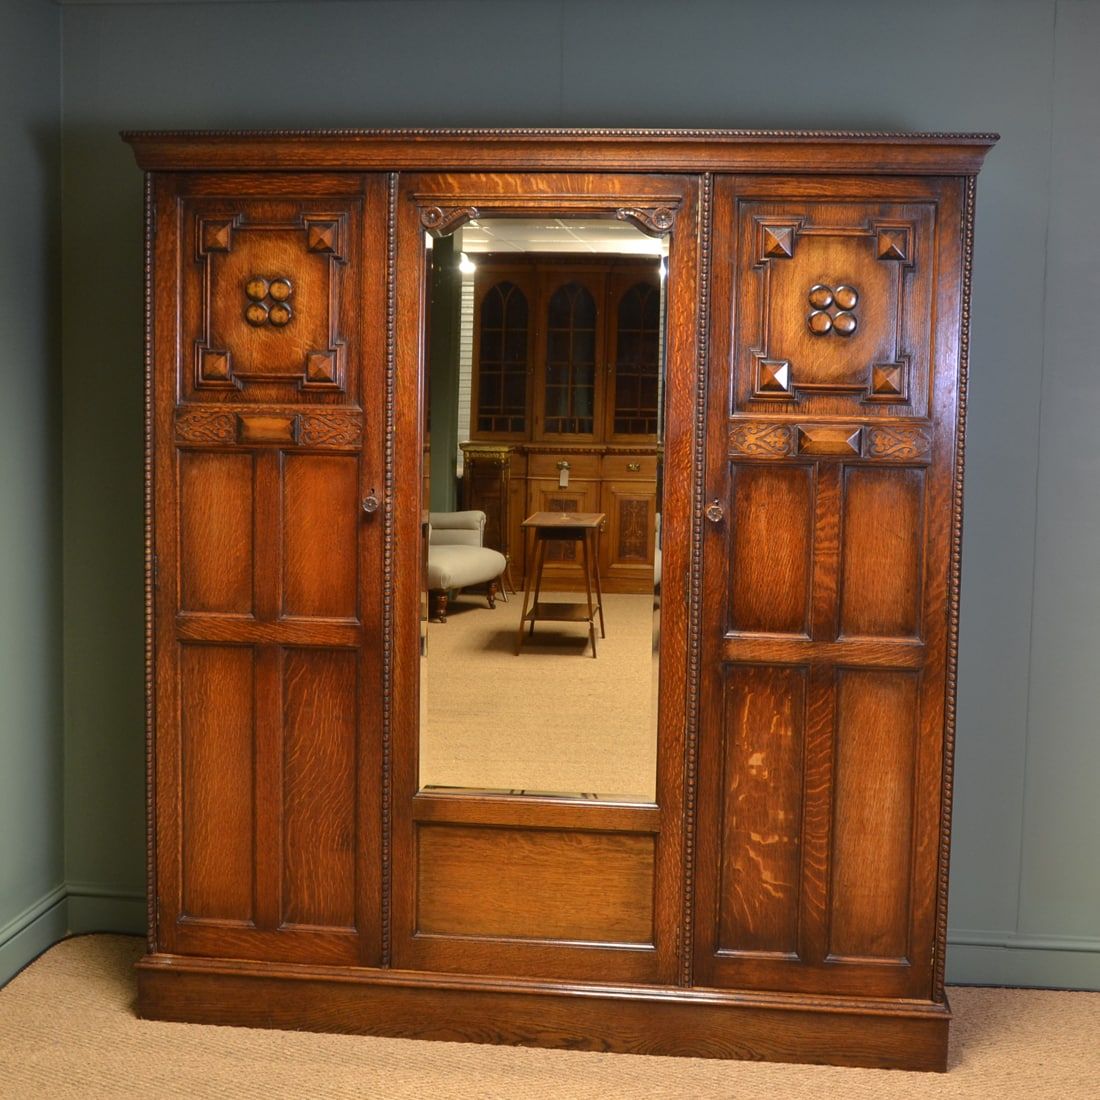 Antique Wardrobes For Sale – Victorian, Georgian & Edwardian In Antique Triple Wardrobes (View 13 of 15)